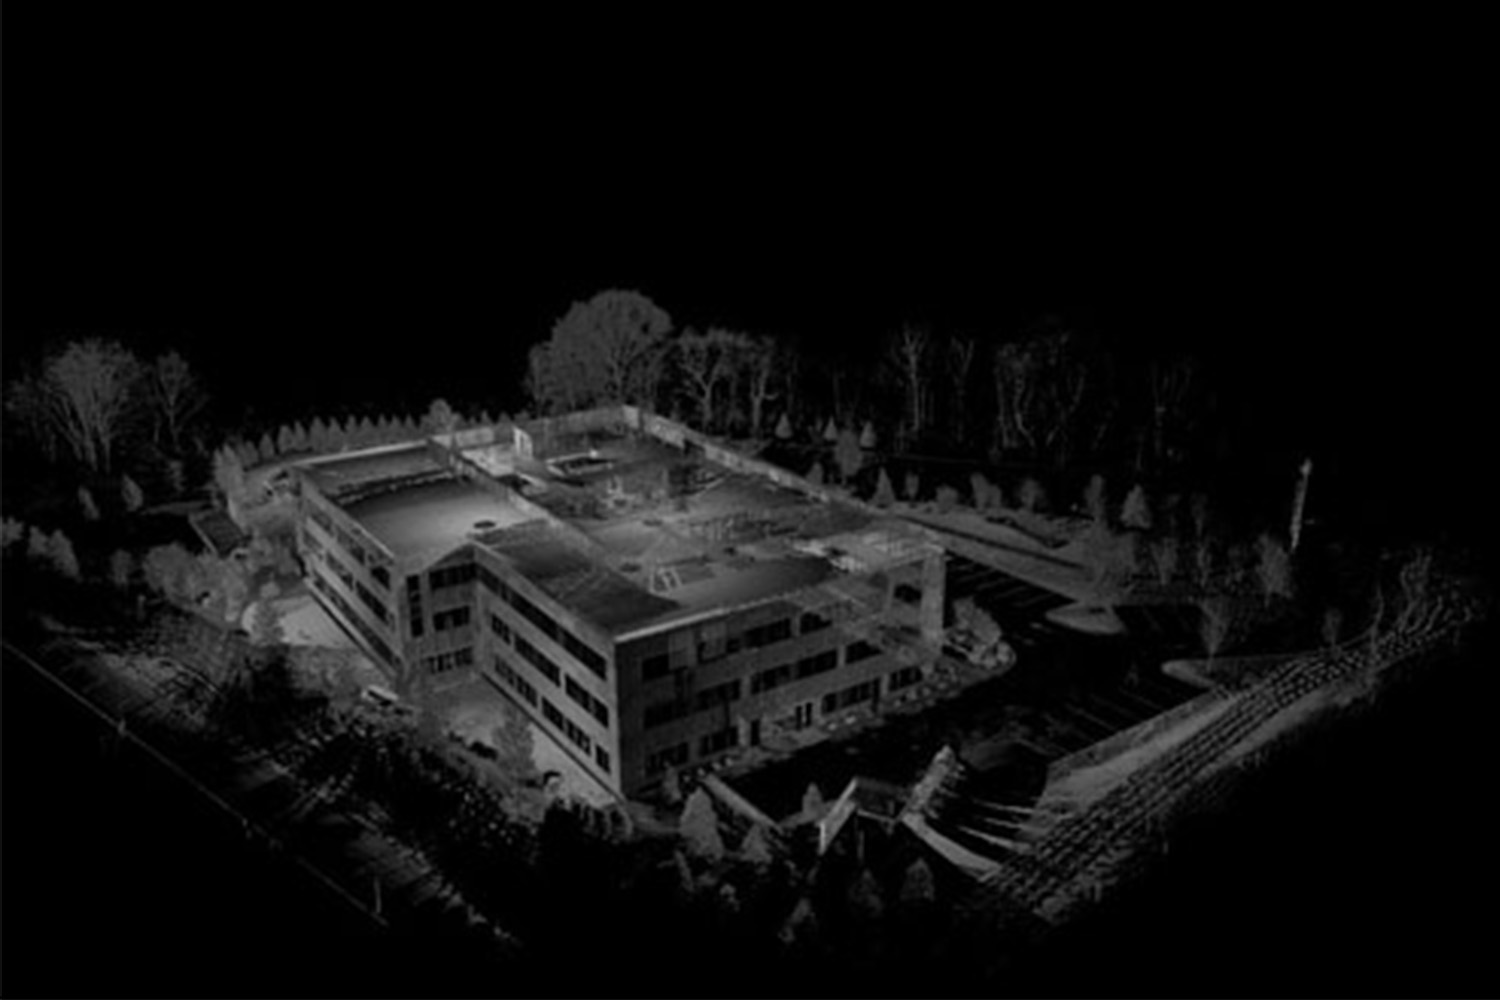 Black, gritty laser scan of Autodesk's headquarters in Waltham